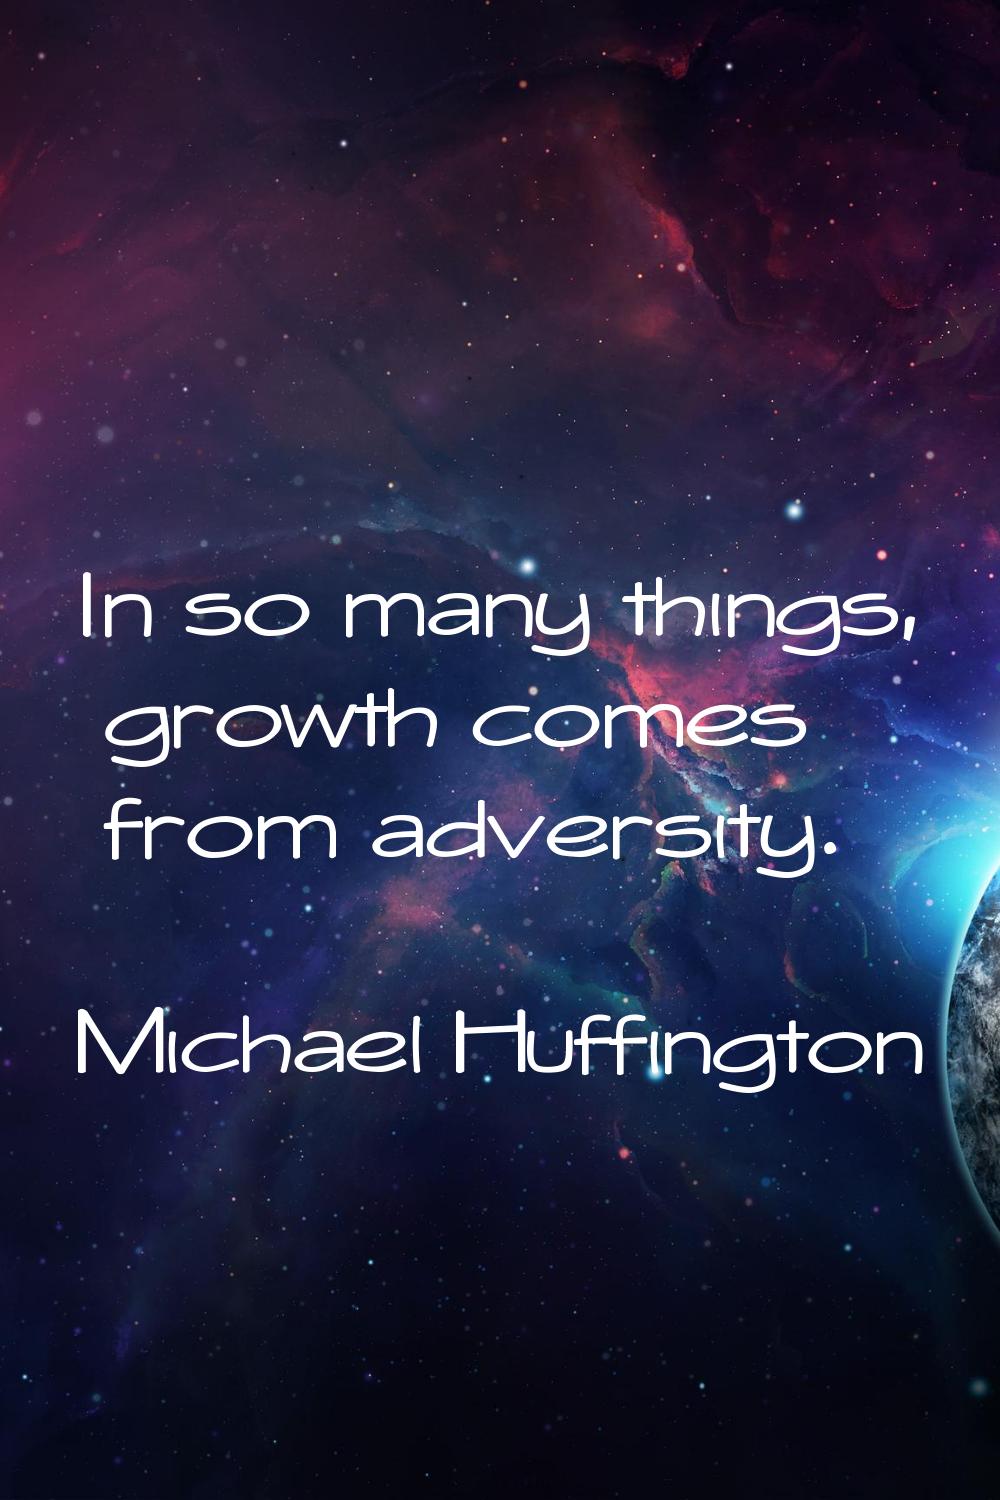 In so many things, growth comes from adversity.